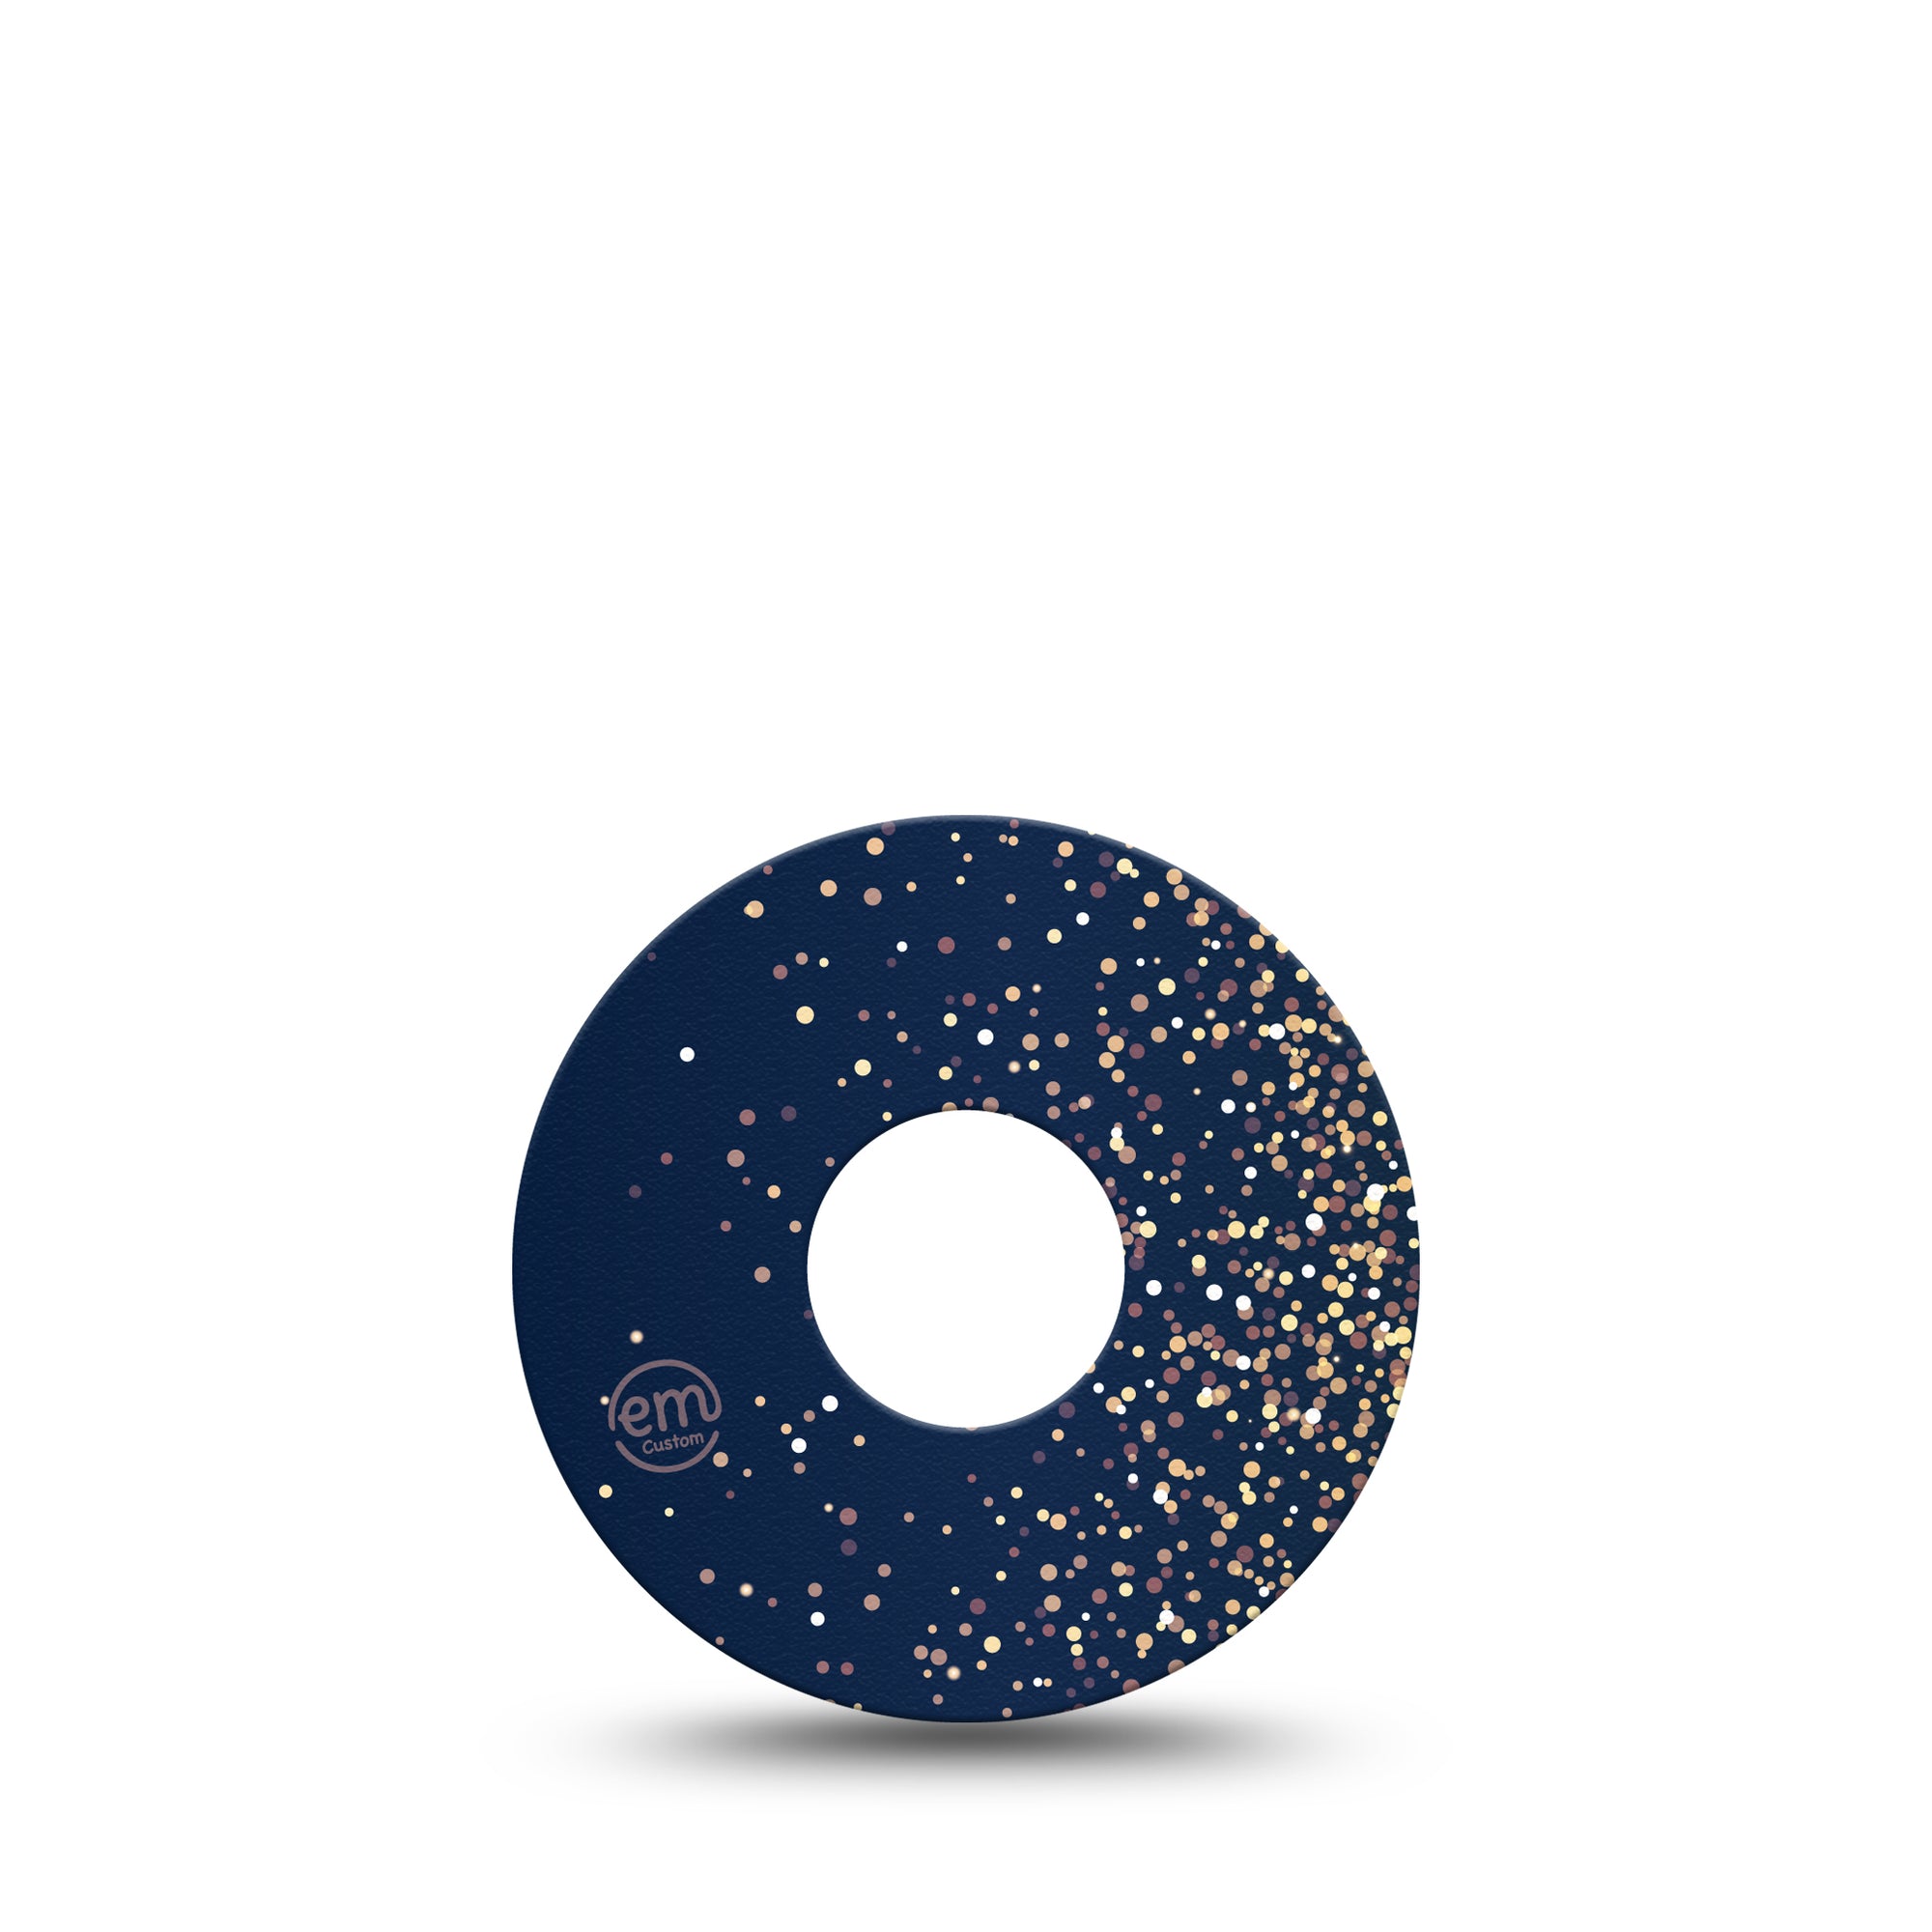 ExpressionMed Gold Sparkles Libre 3 Tape, Single, Midnight Gold Glitter Themed, CGM Overlay Patch Design